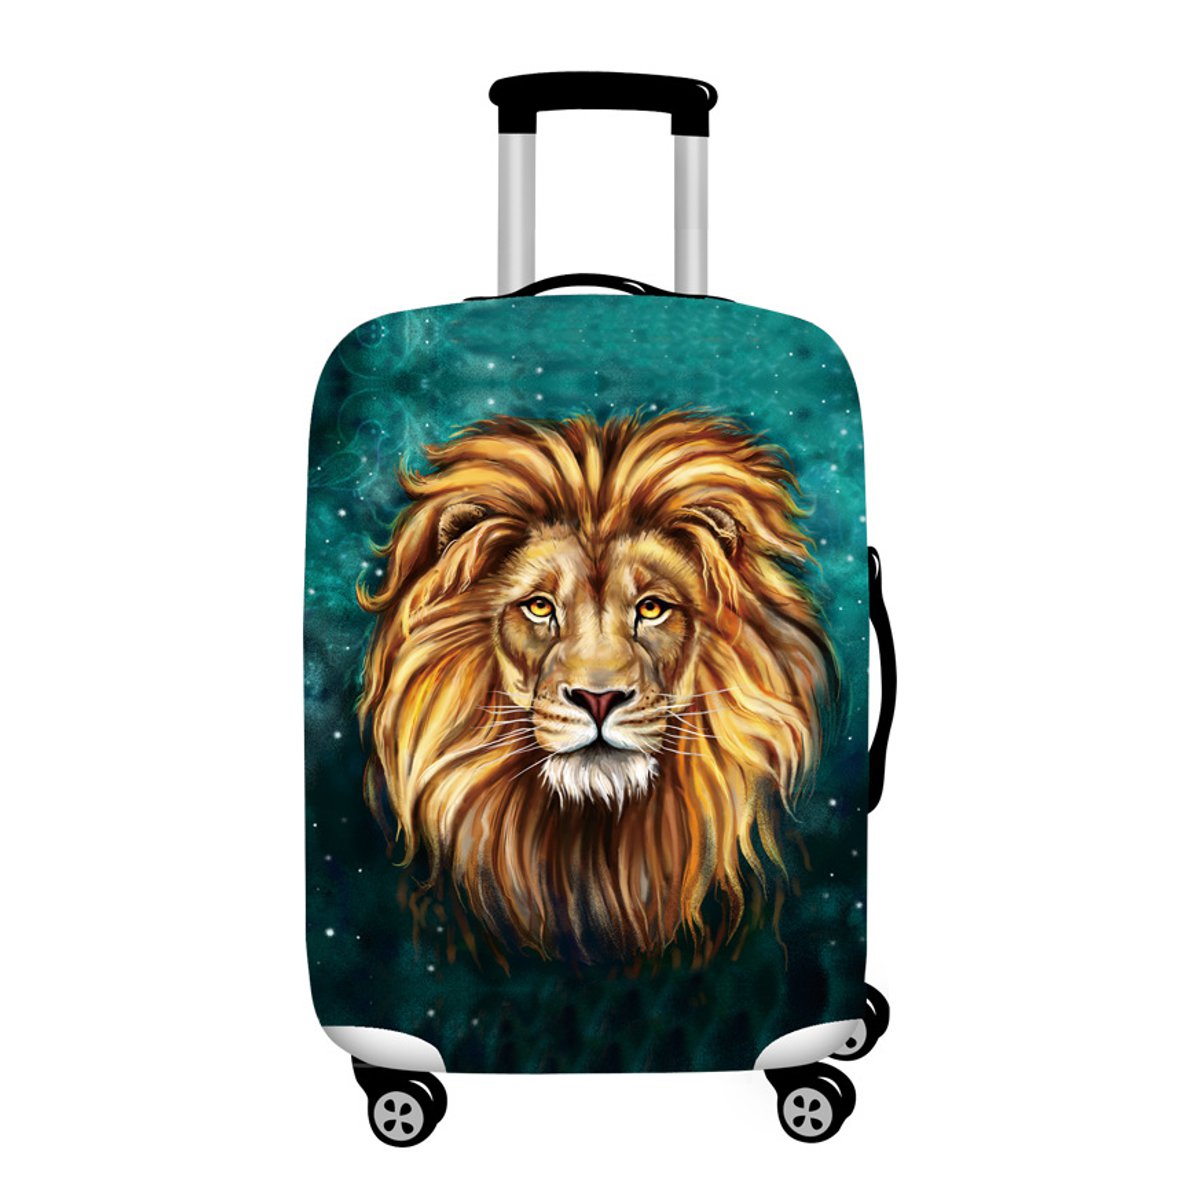 18-32inch Polyester Luggage Bag Cover Lion Travel Elastic Suitcase Cover Dust Proof Protective 8